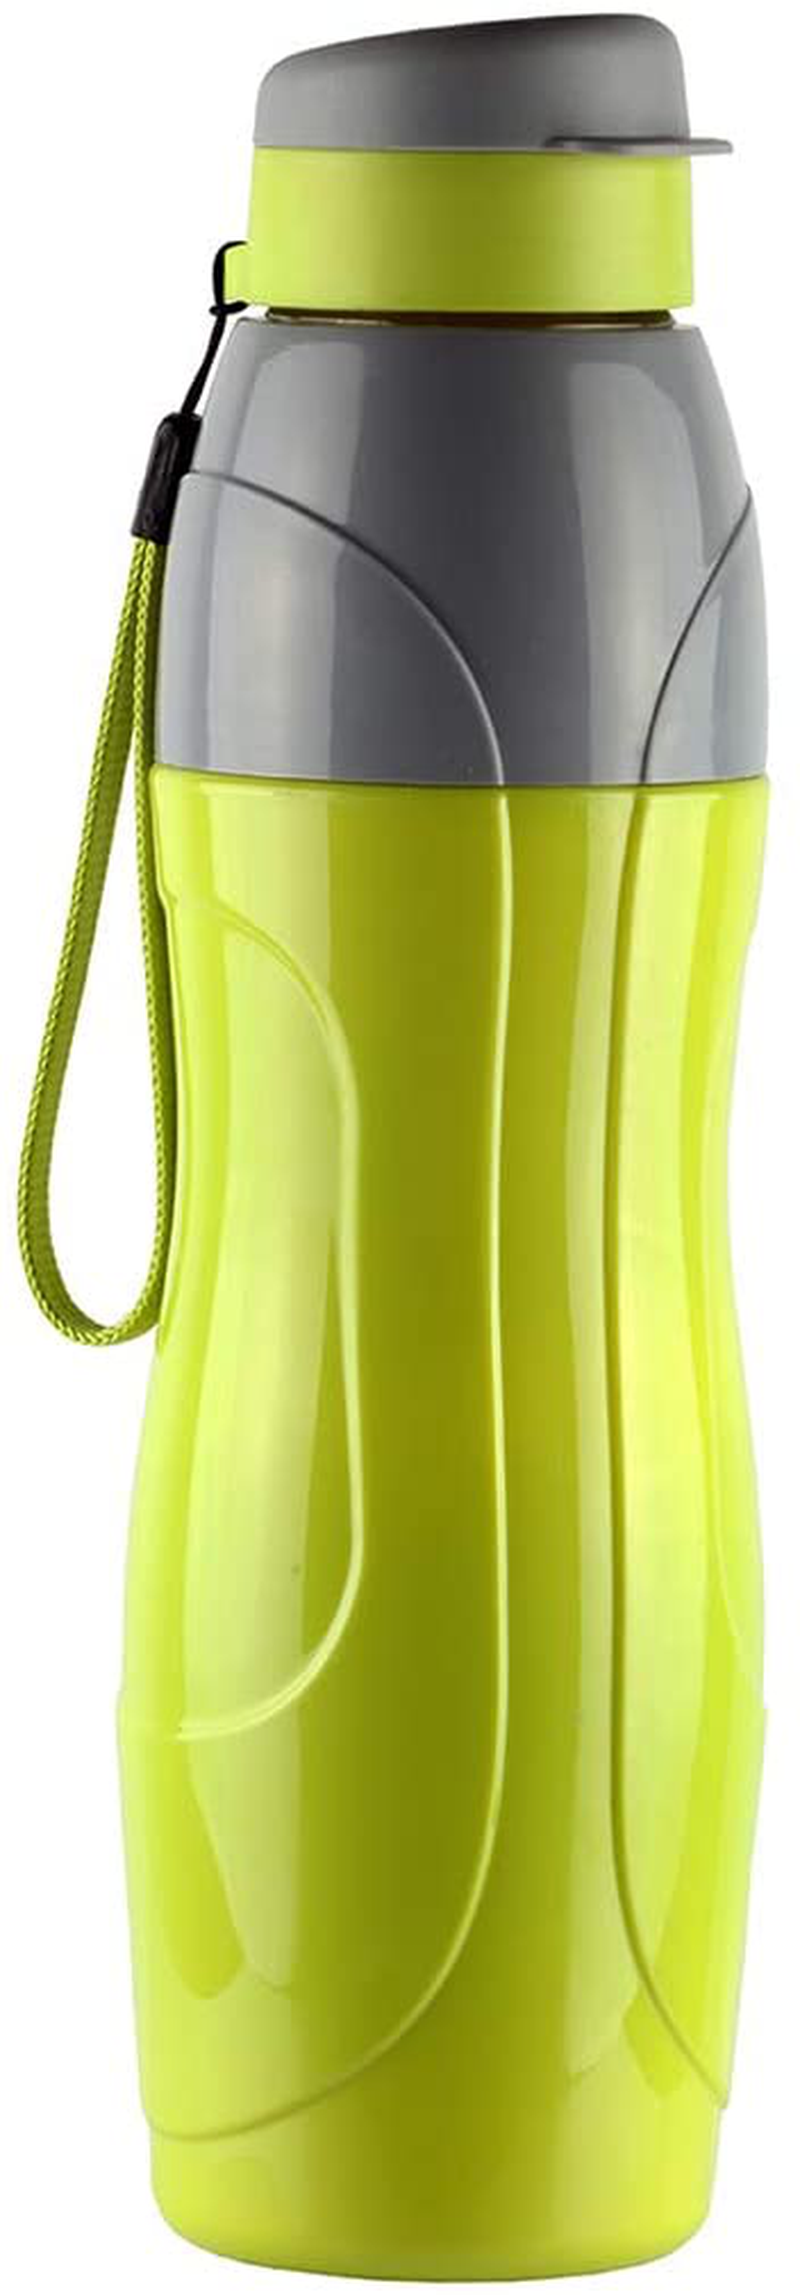 Plastic Insulated BPA Free Leak Proof Water Bottle for Gym, Swimming, Running/Easy Carry Ergonomic Reusable Drinking Container with Wide Mouth and Easy Flip Top Cap